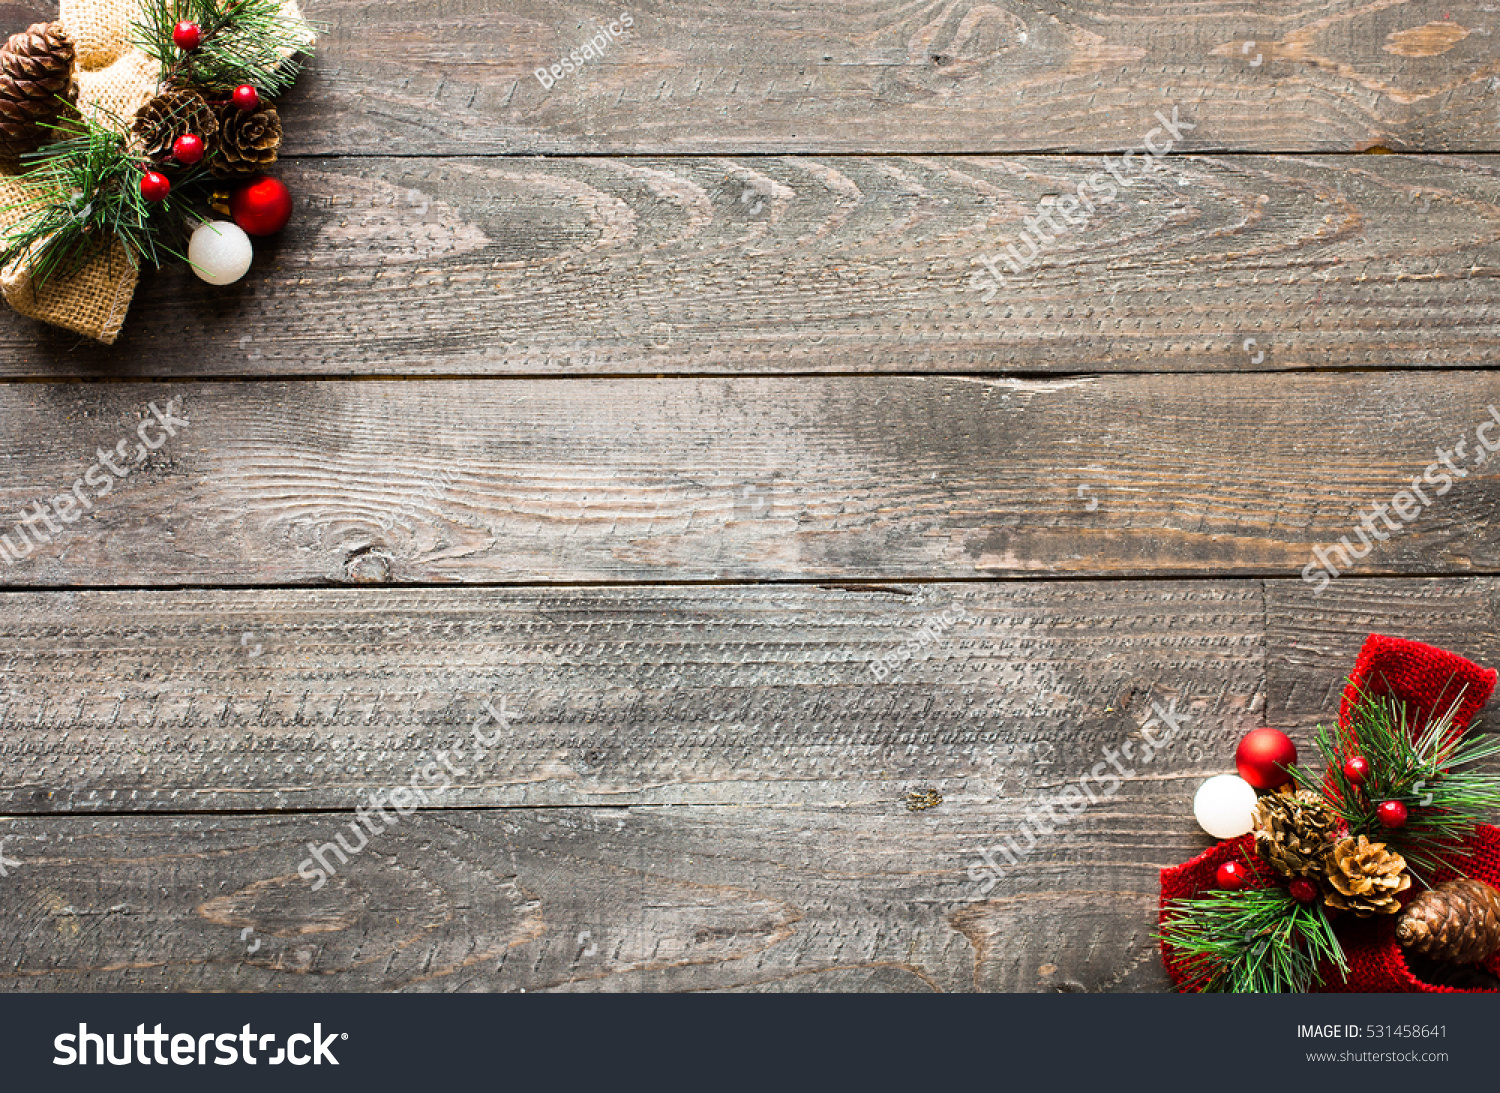 Christmas Holiday Background With Ornaments Like Cookies And Oranges On ...